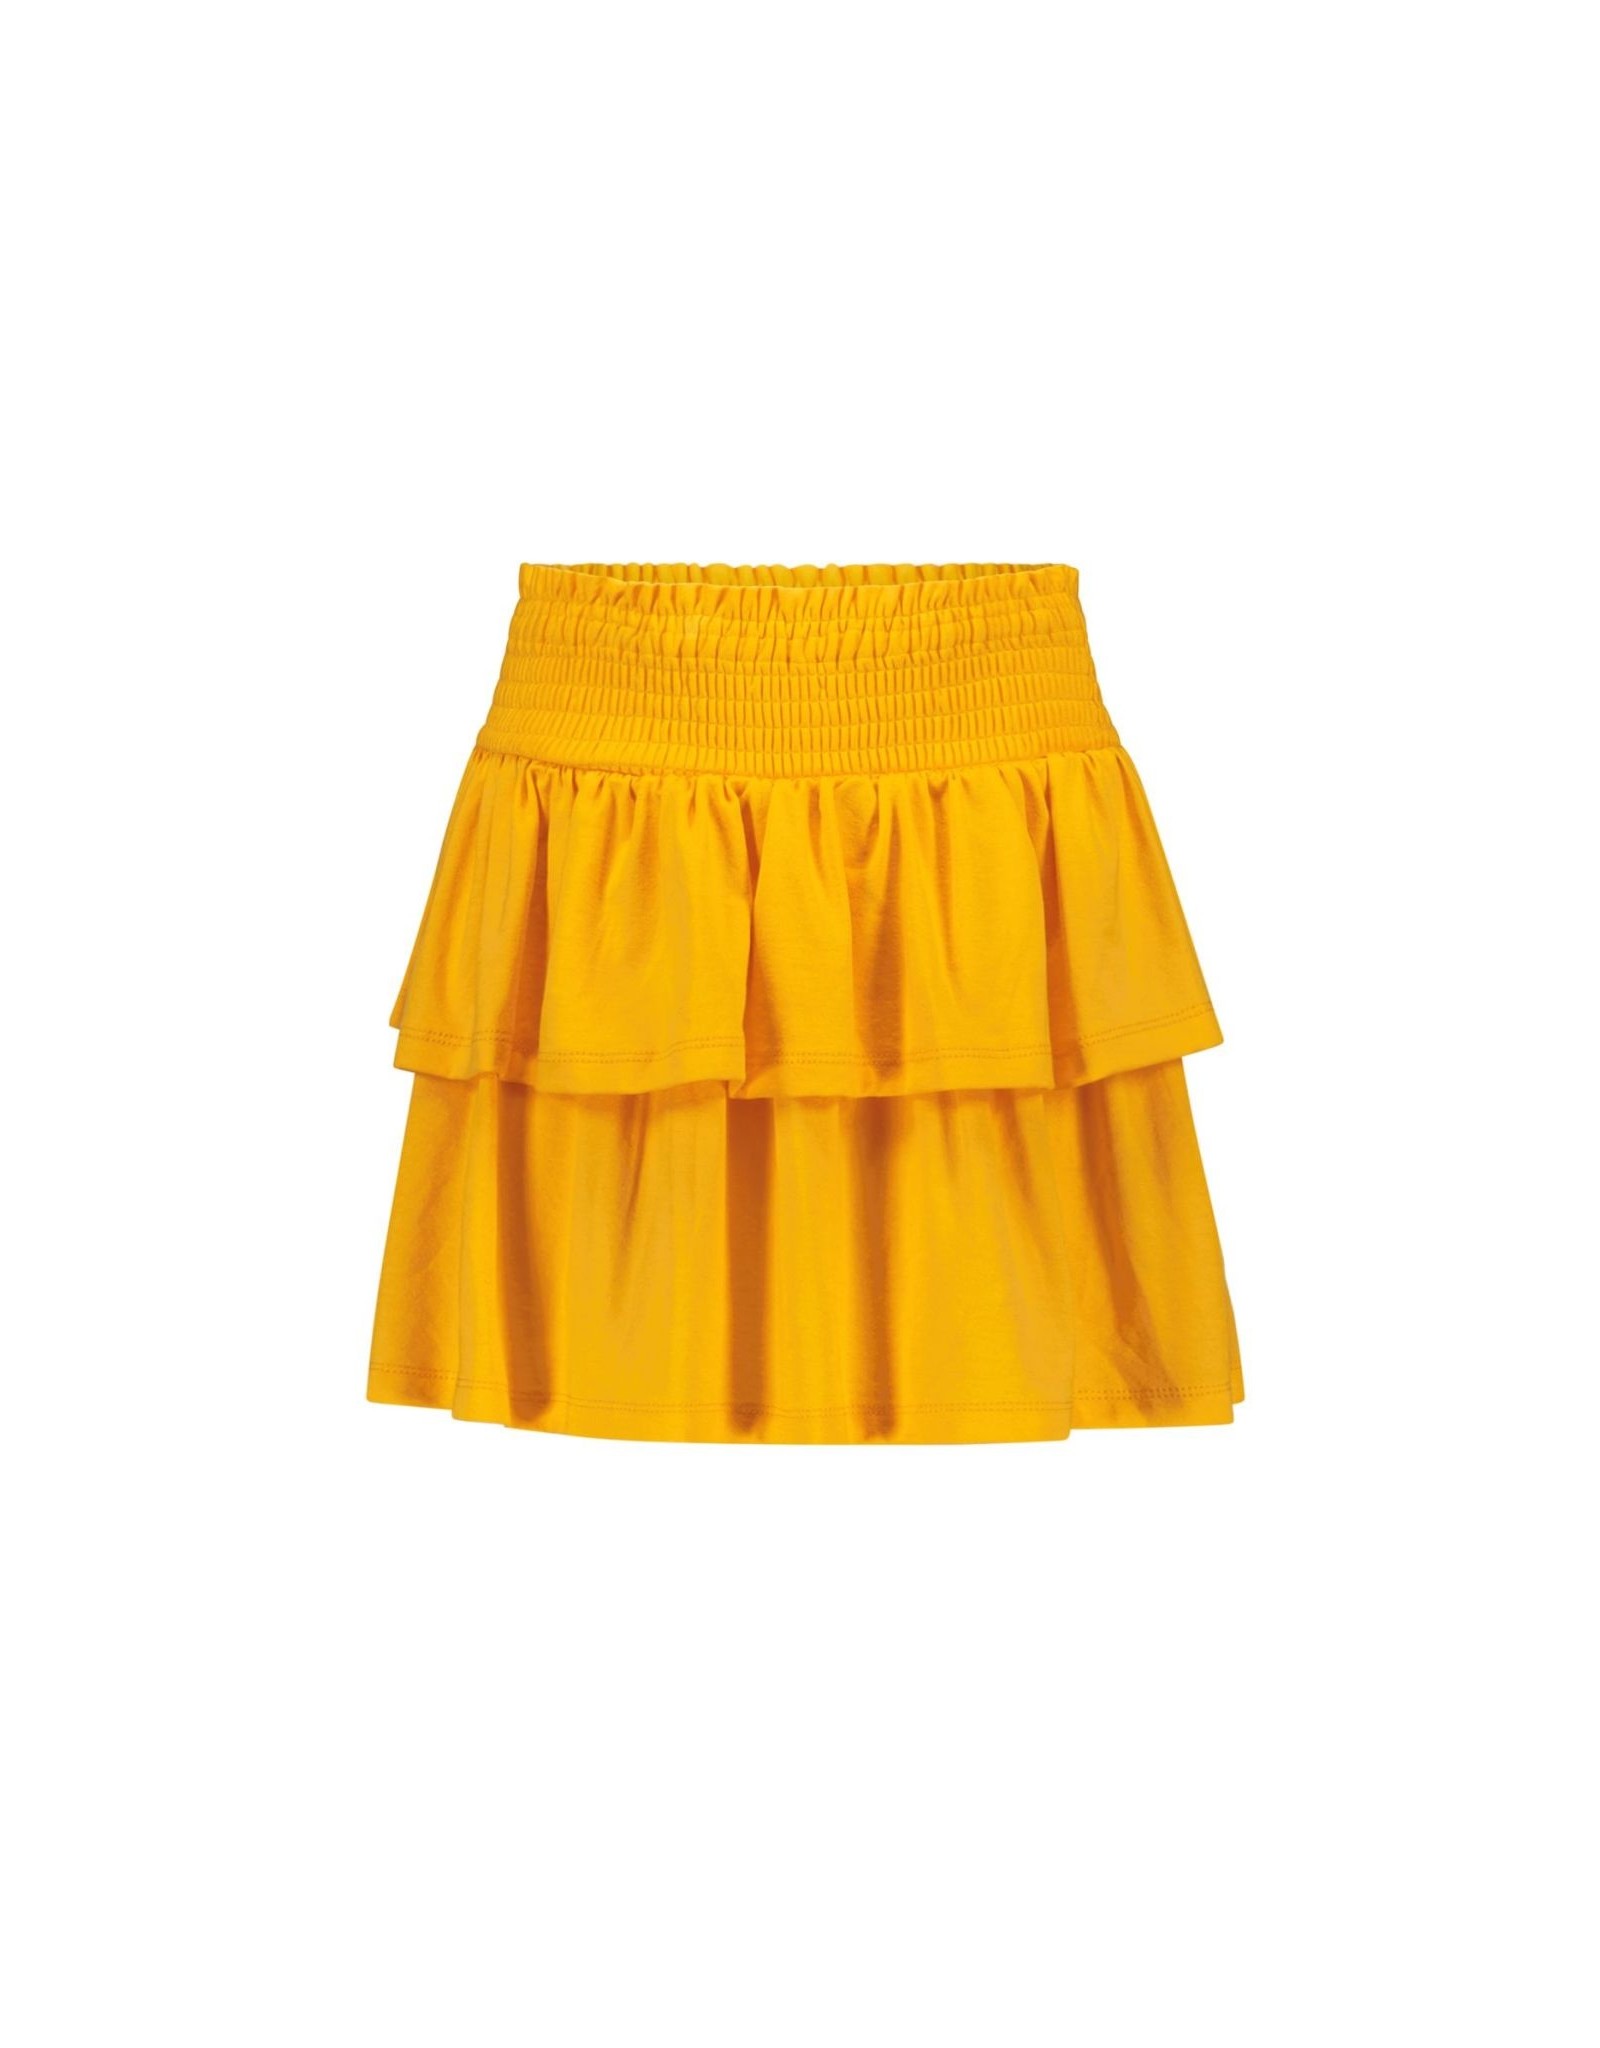 B-nosy B.confident  Girls skirt with high smocked wb and 2 layers fire